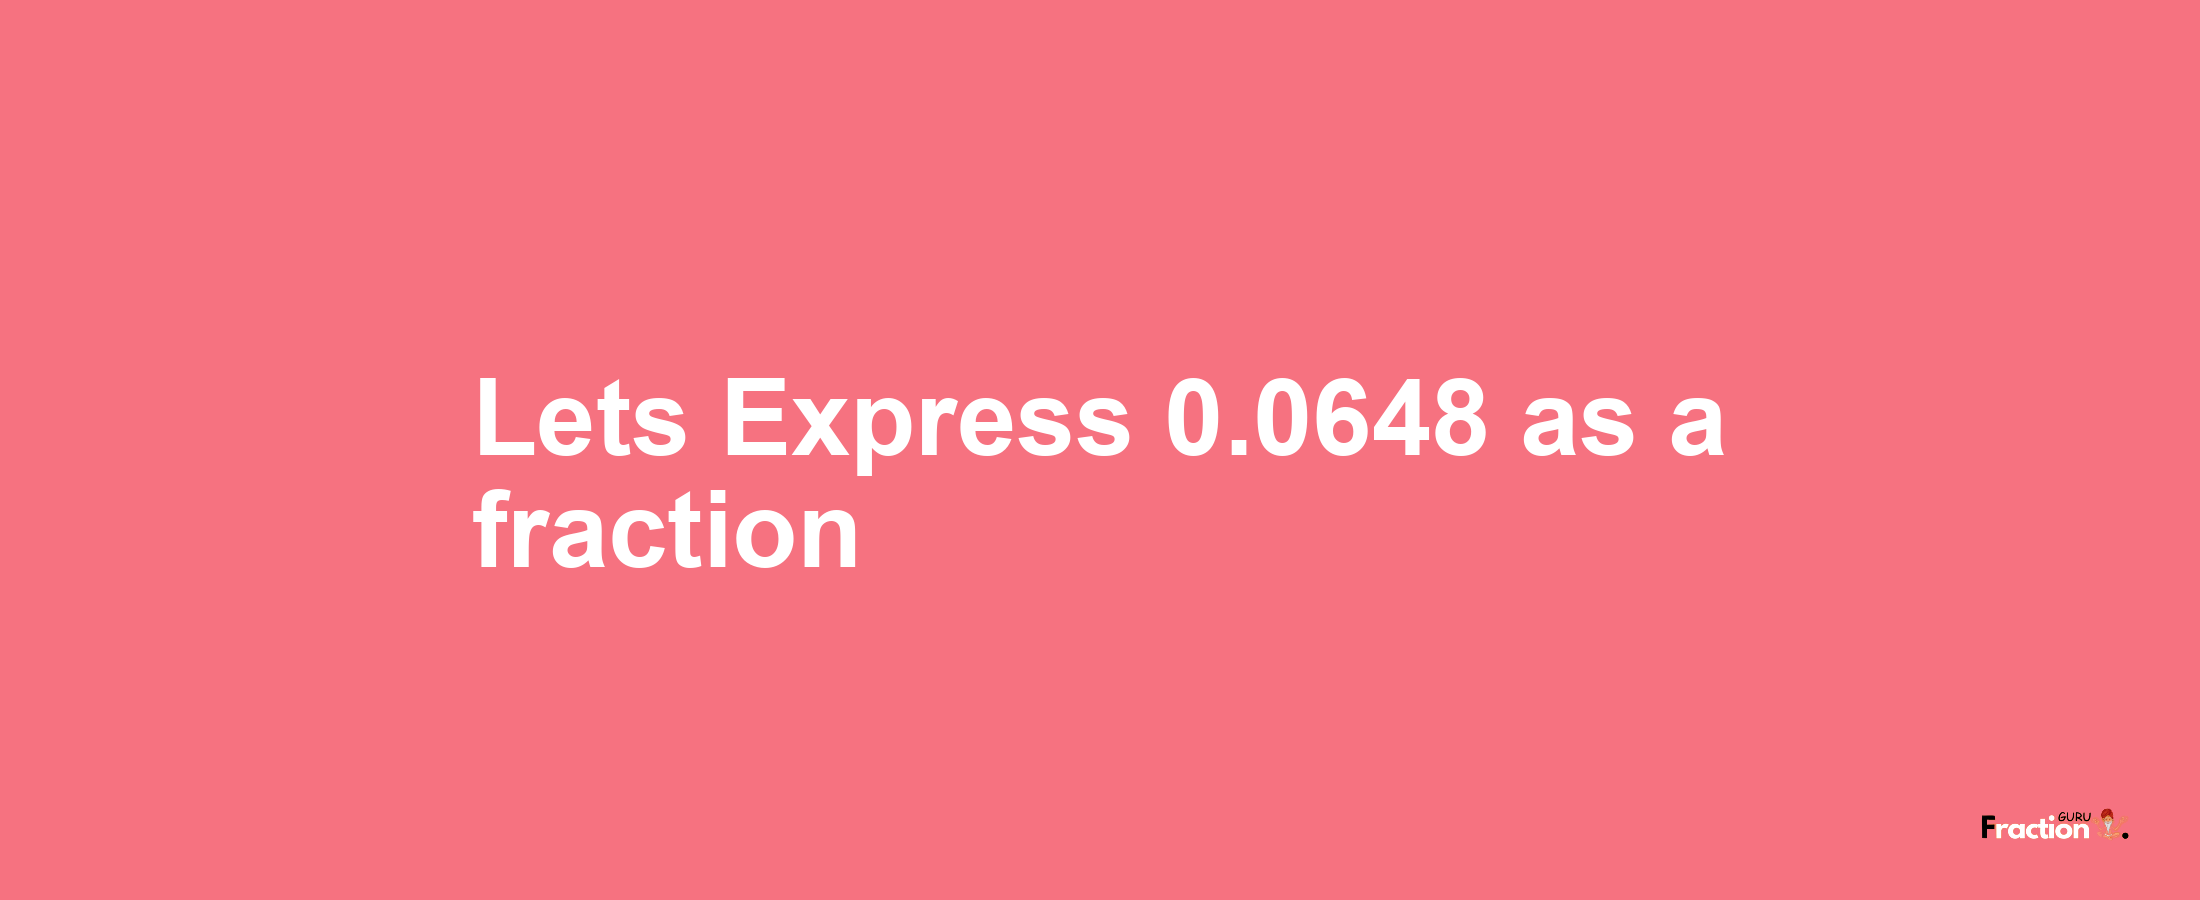 Lets Express 0.0648 as afraction